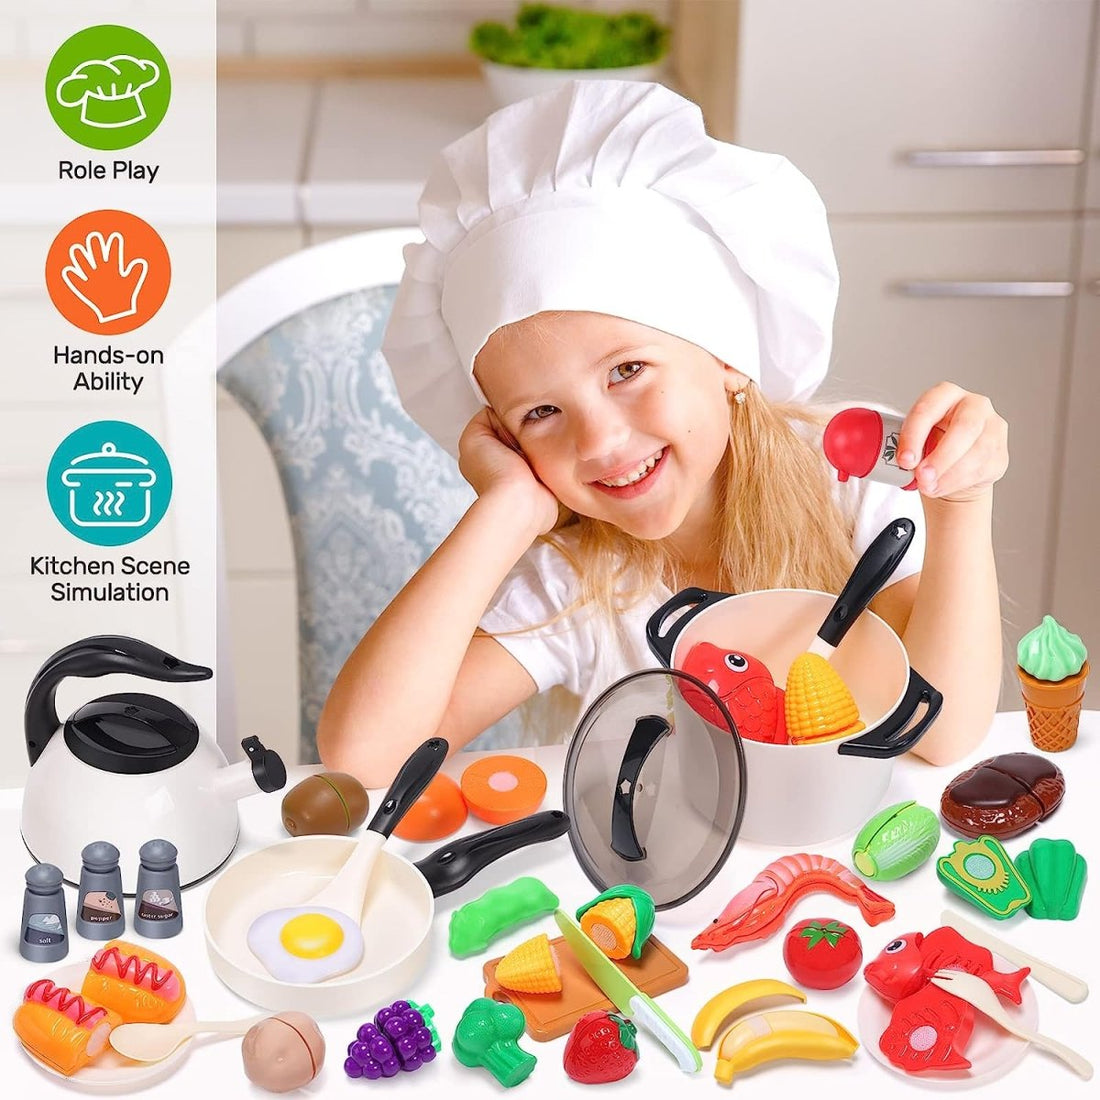 CUTE STONE Play Kitchen Accessories Toy Play Food Sets for Kids Kitchen Playset